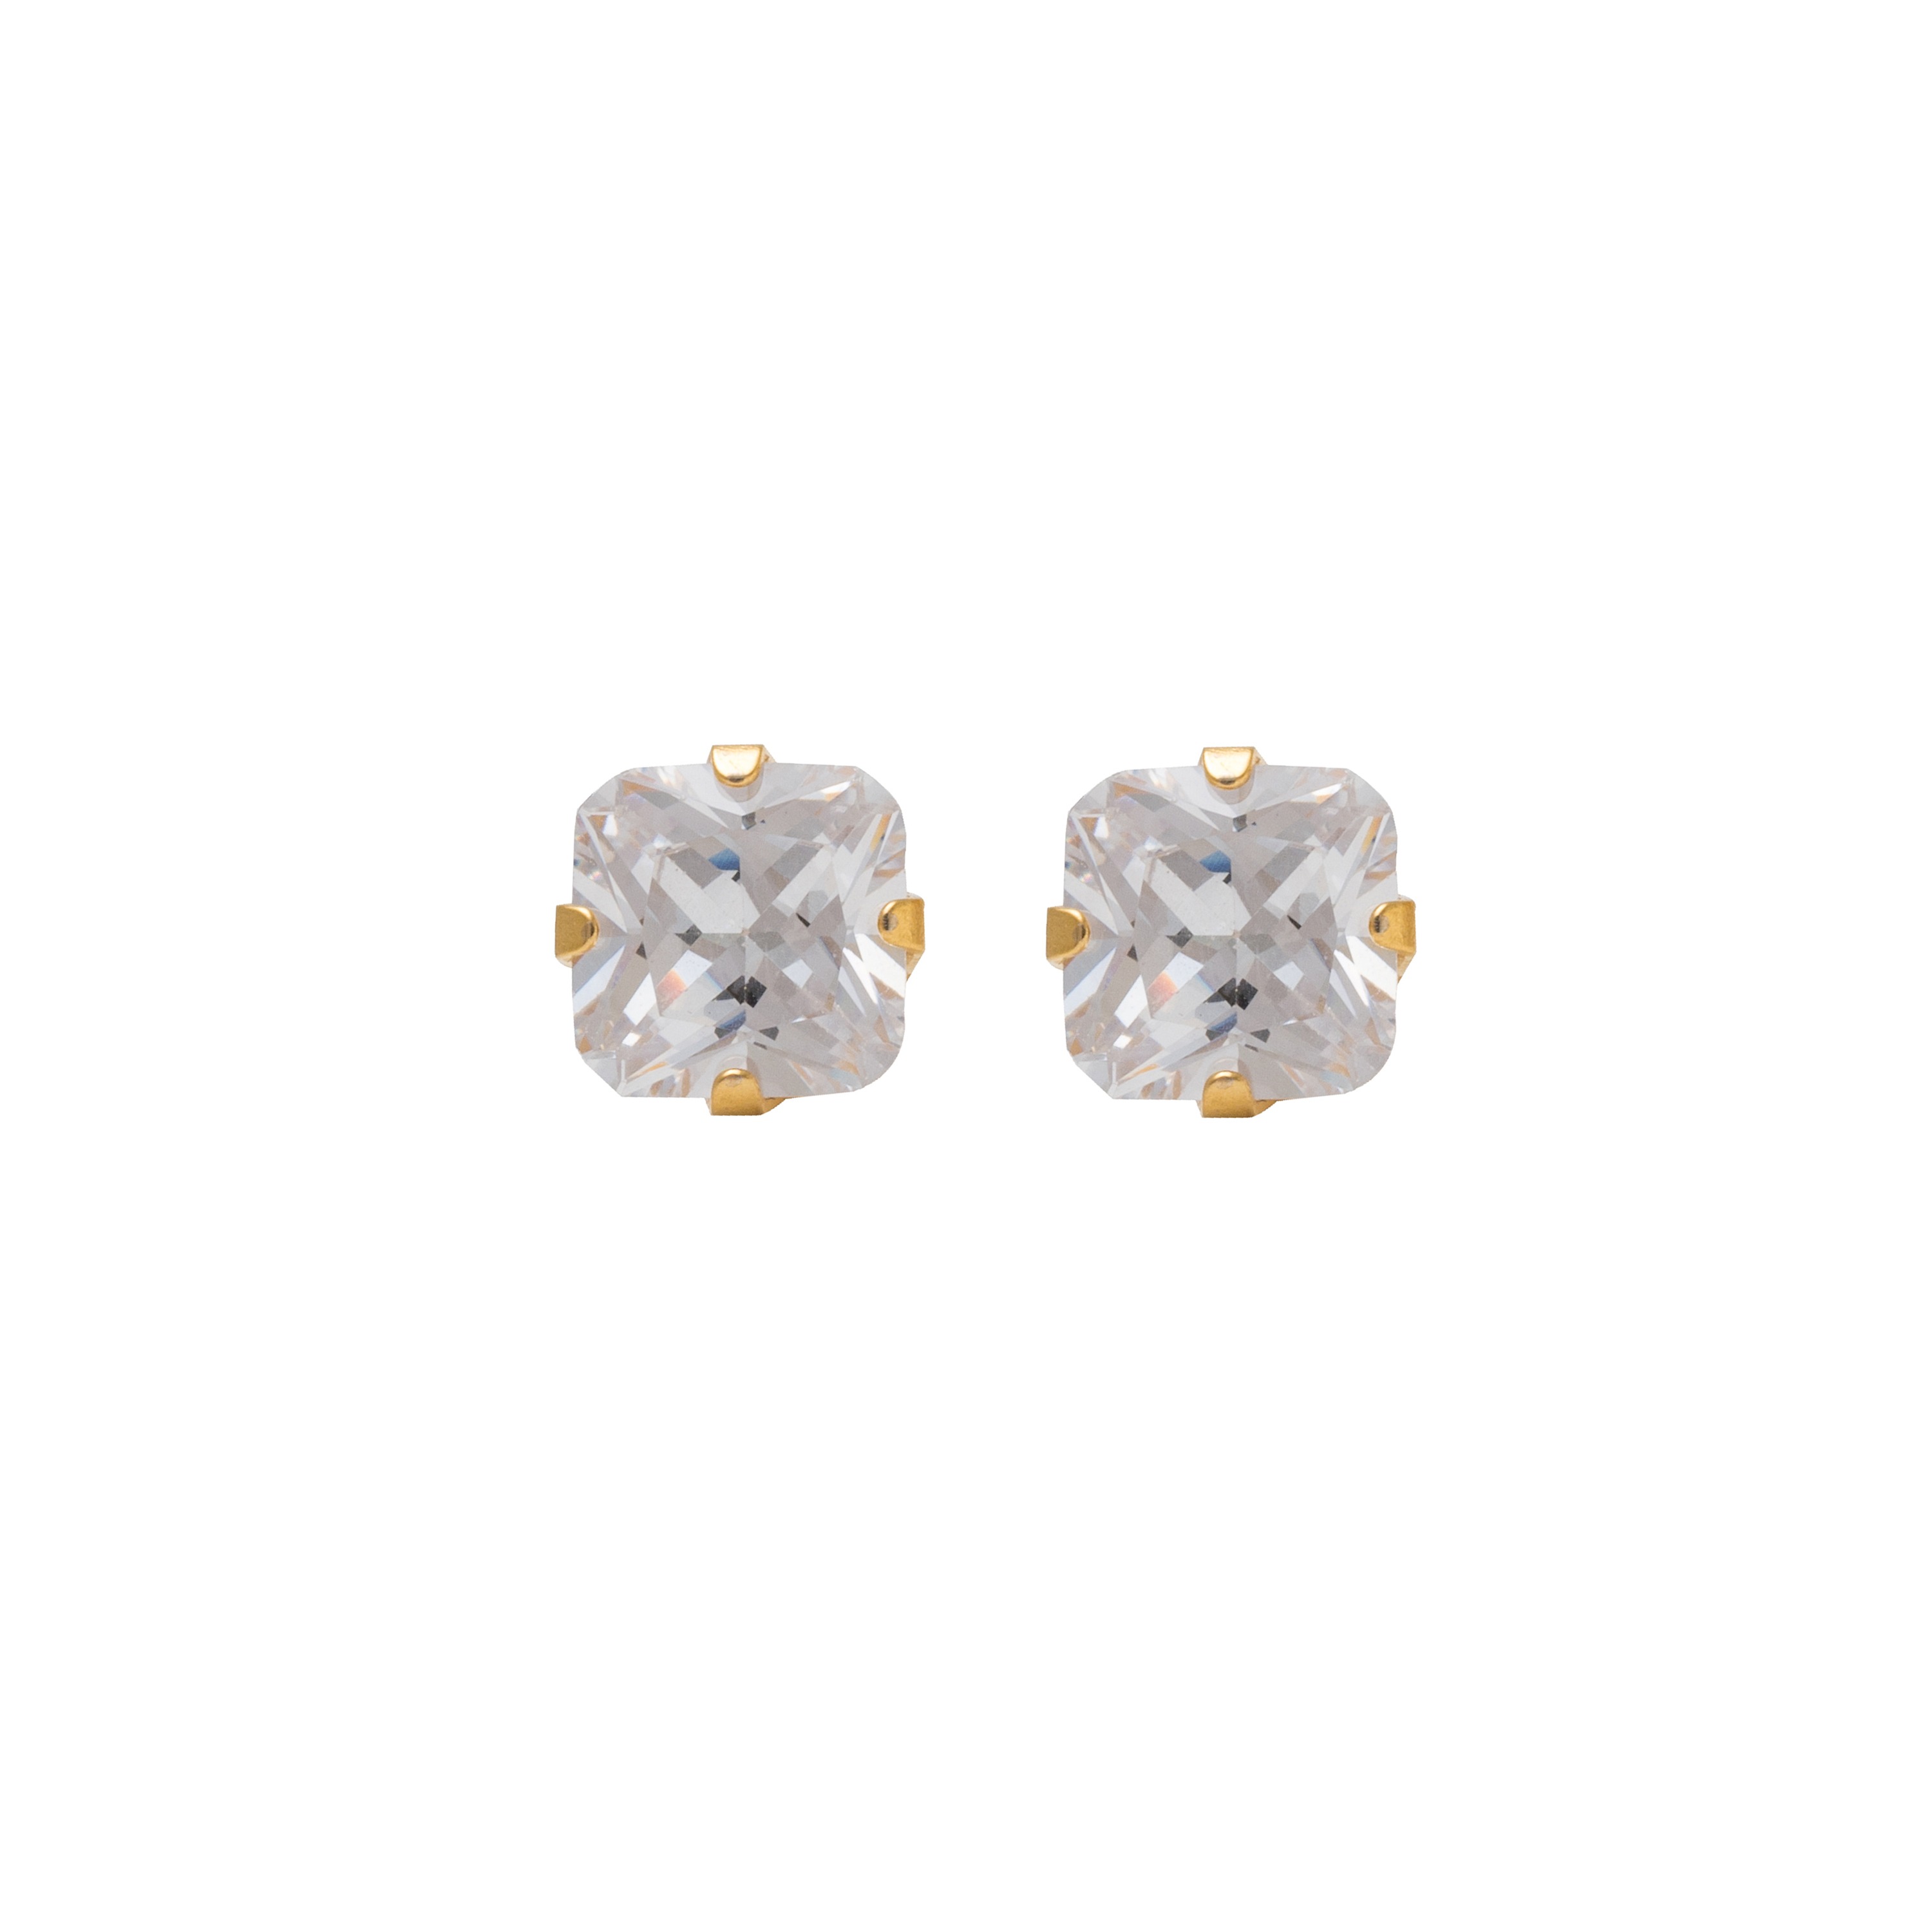 6*6MM - Cubic Zirconia (Square) - Crystal Clear | 24K Gold Plated Simple Yet Stylish, Cute & Trending Fashion Earrings / Ear Studs for Girls & Women Online @ Pakistan | Studex Sensitive (for daily wear)